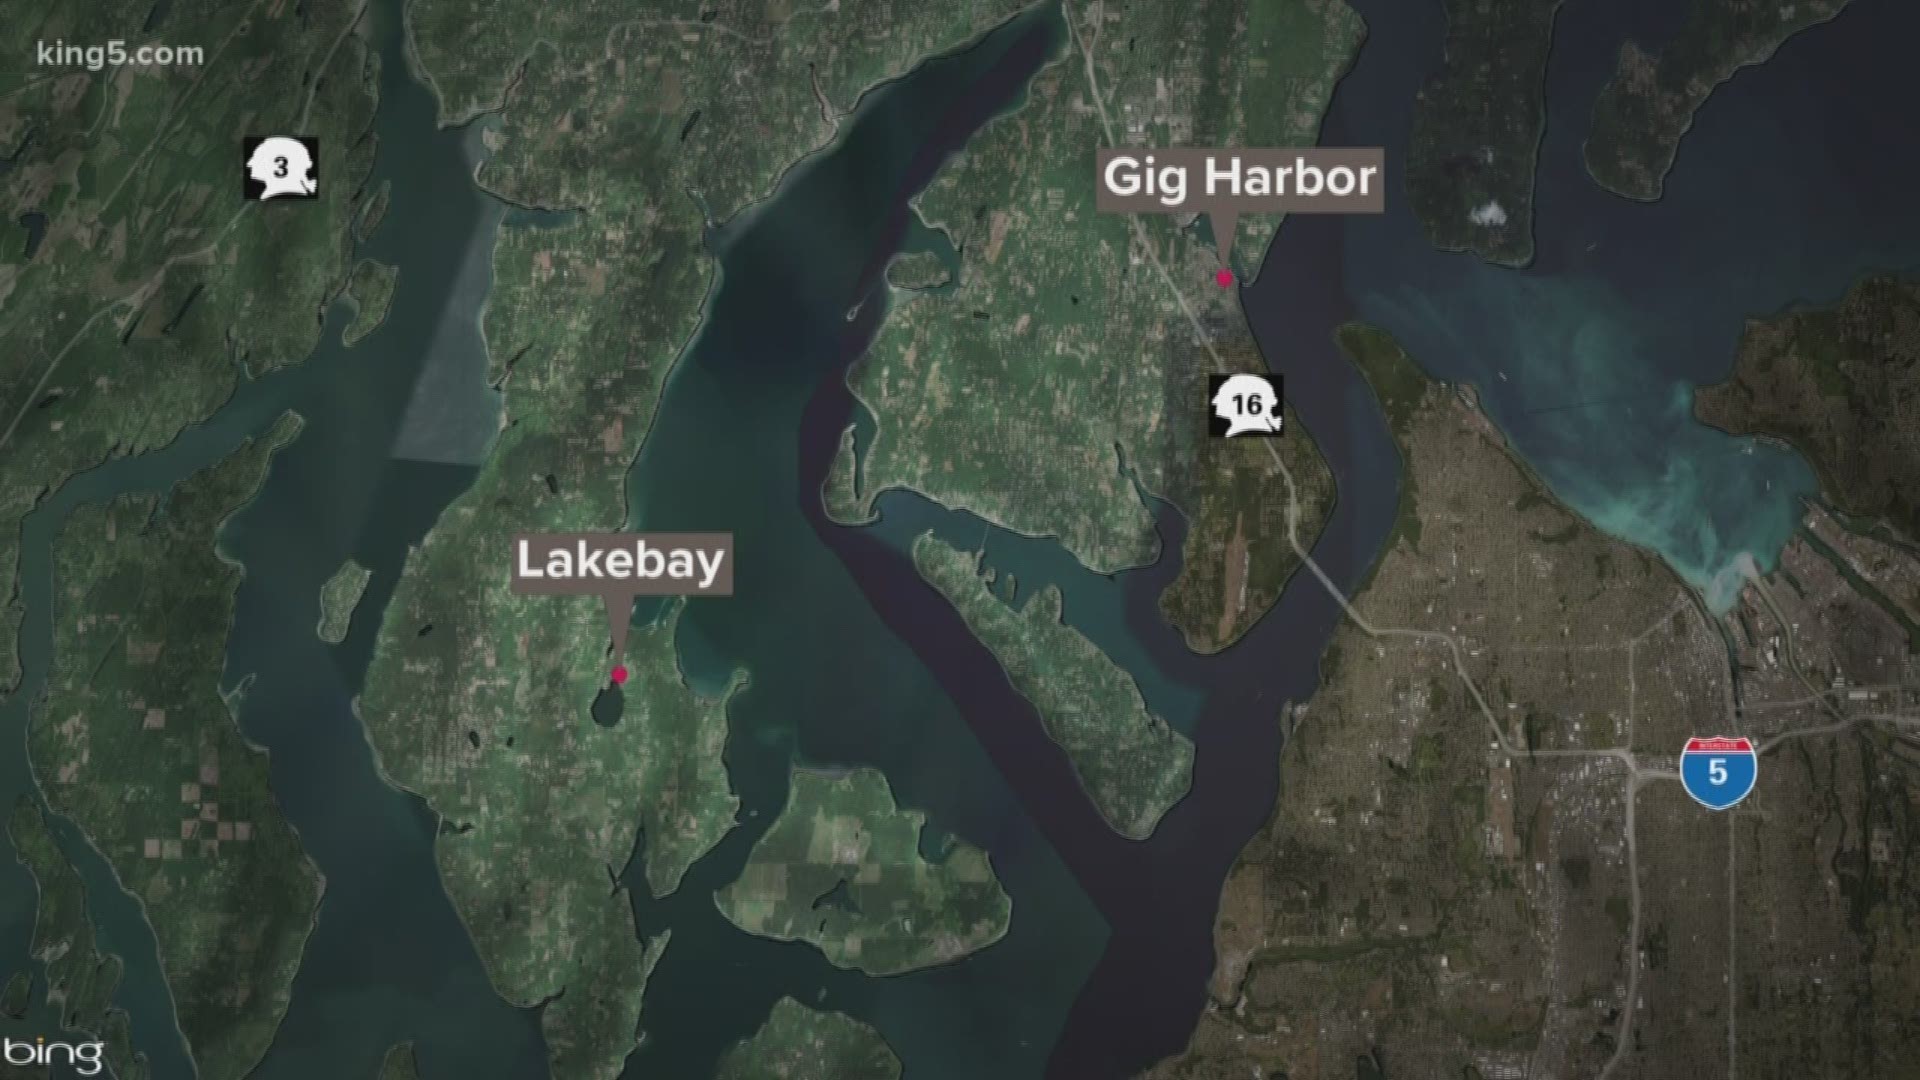 The chase stretched for 20 miles from Lakebay to Gig Harbor as deputies tried to catch two suspects wanted for a home shooting and robbery.